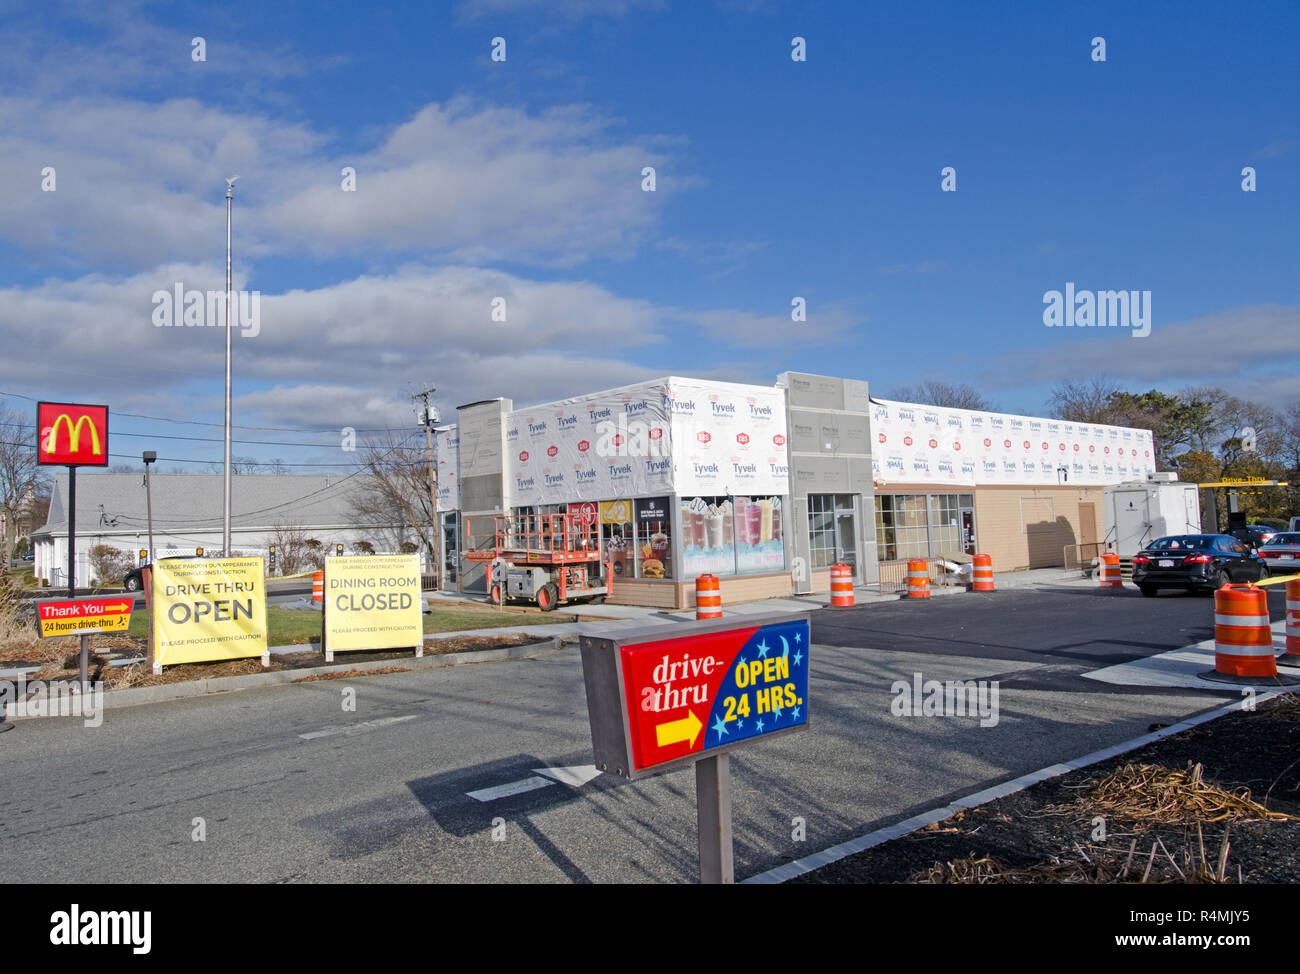 McDonalds fast food restaurant being remodeled with drive thru open and dining room closed signs in Falmouth, Cape Cod, Massachusetts USA Stock Photo